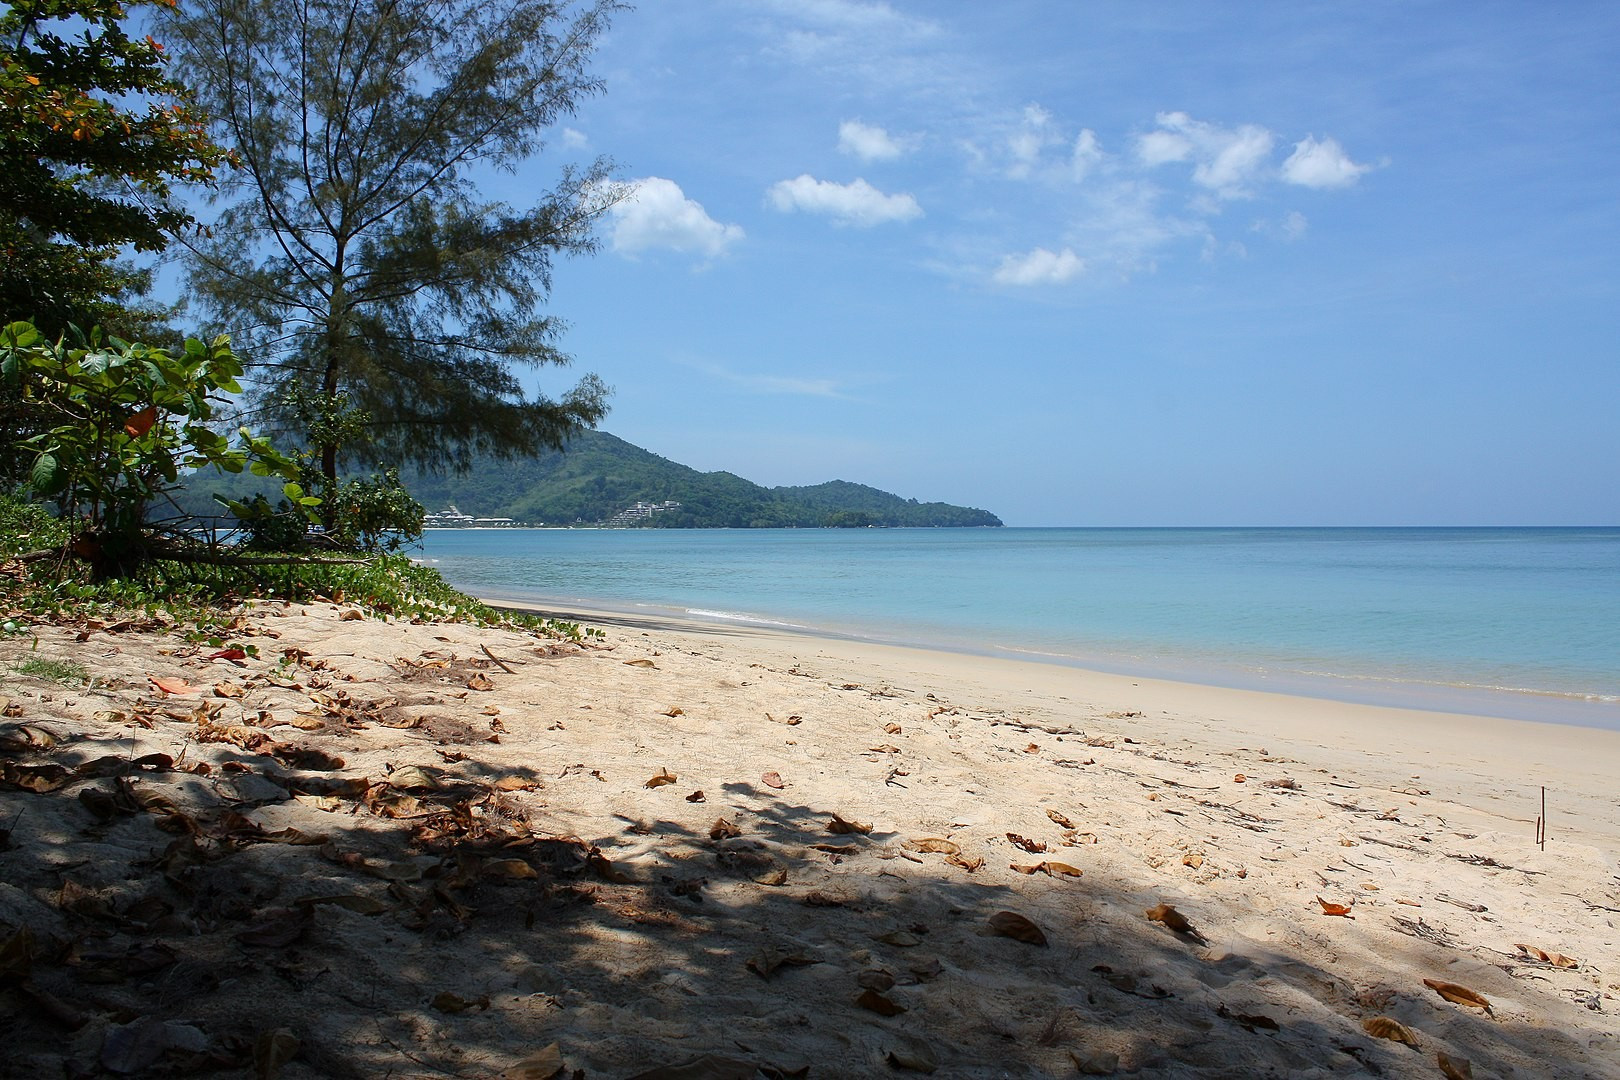 By Andy Mitchell from Glasgow, UK - Nai Yang Beach, Phuket, CC BY-SA 2.0, https://commons.wikimedia.org/w/index.php?curid=26374013